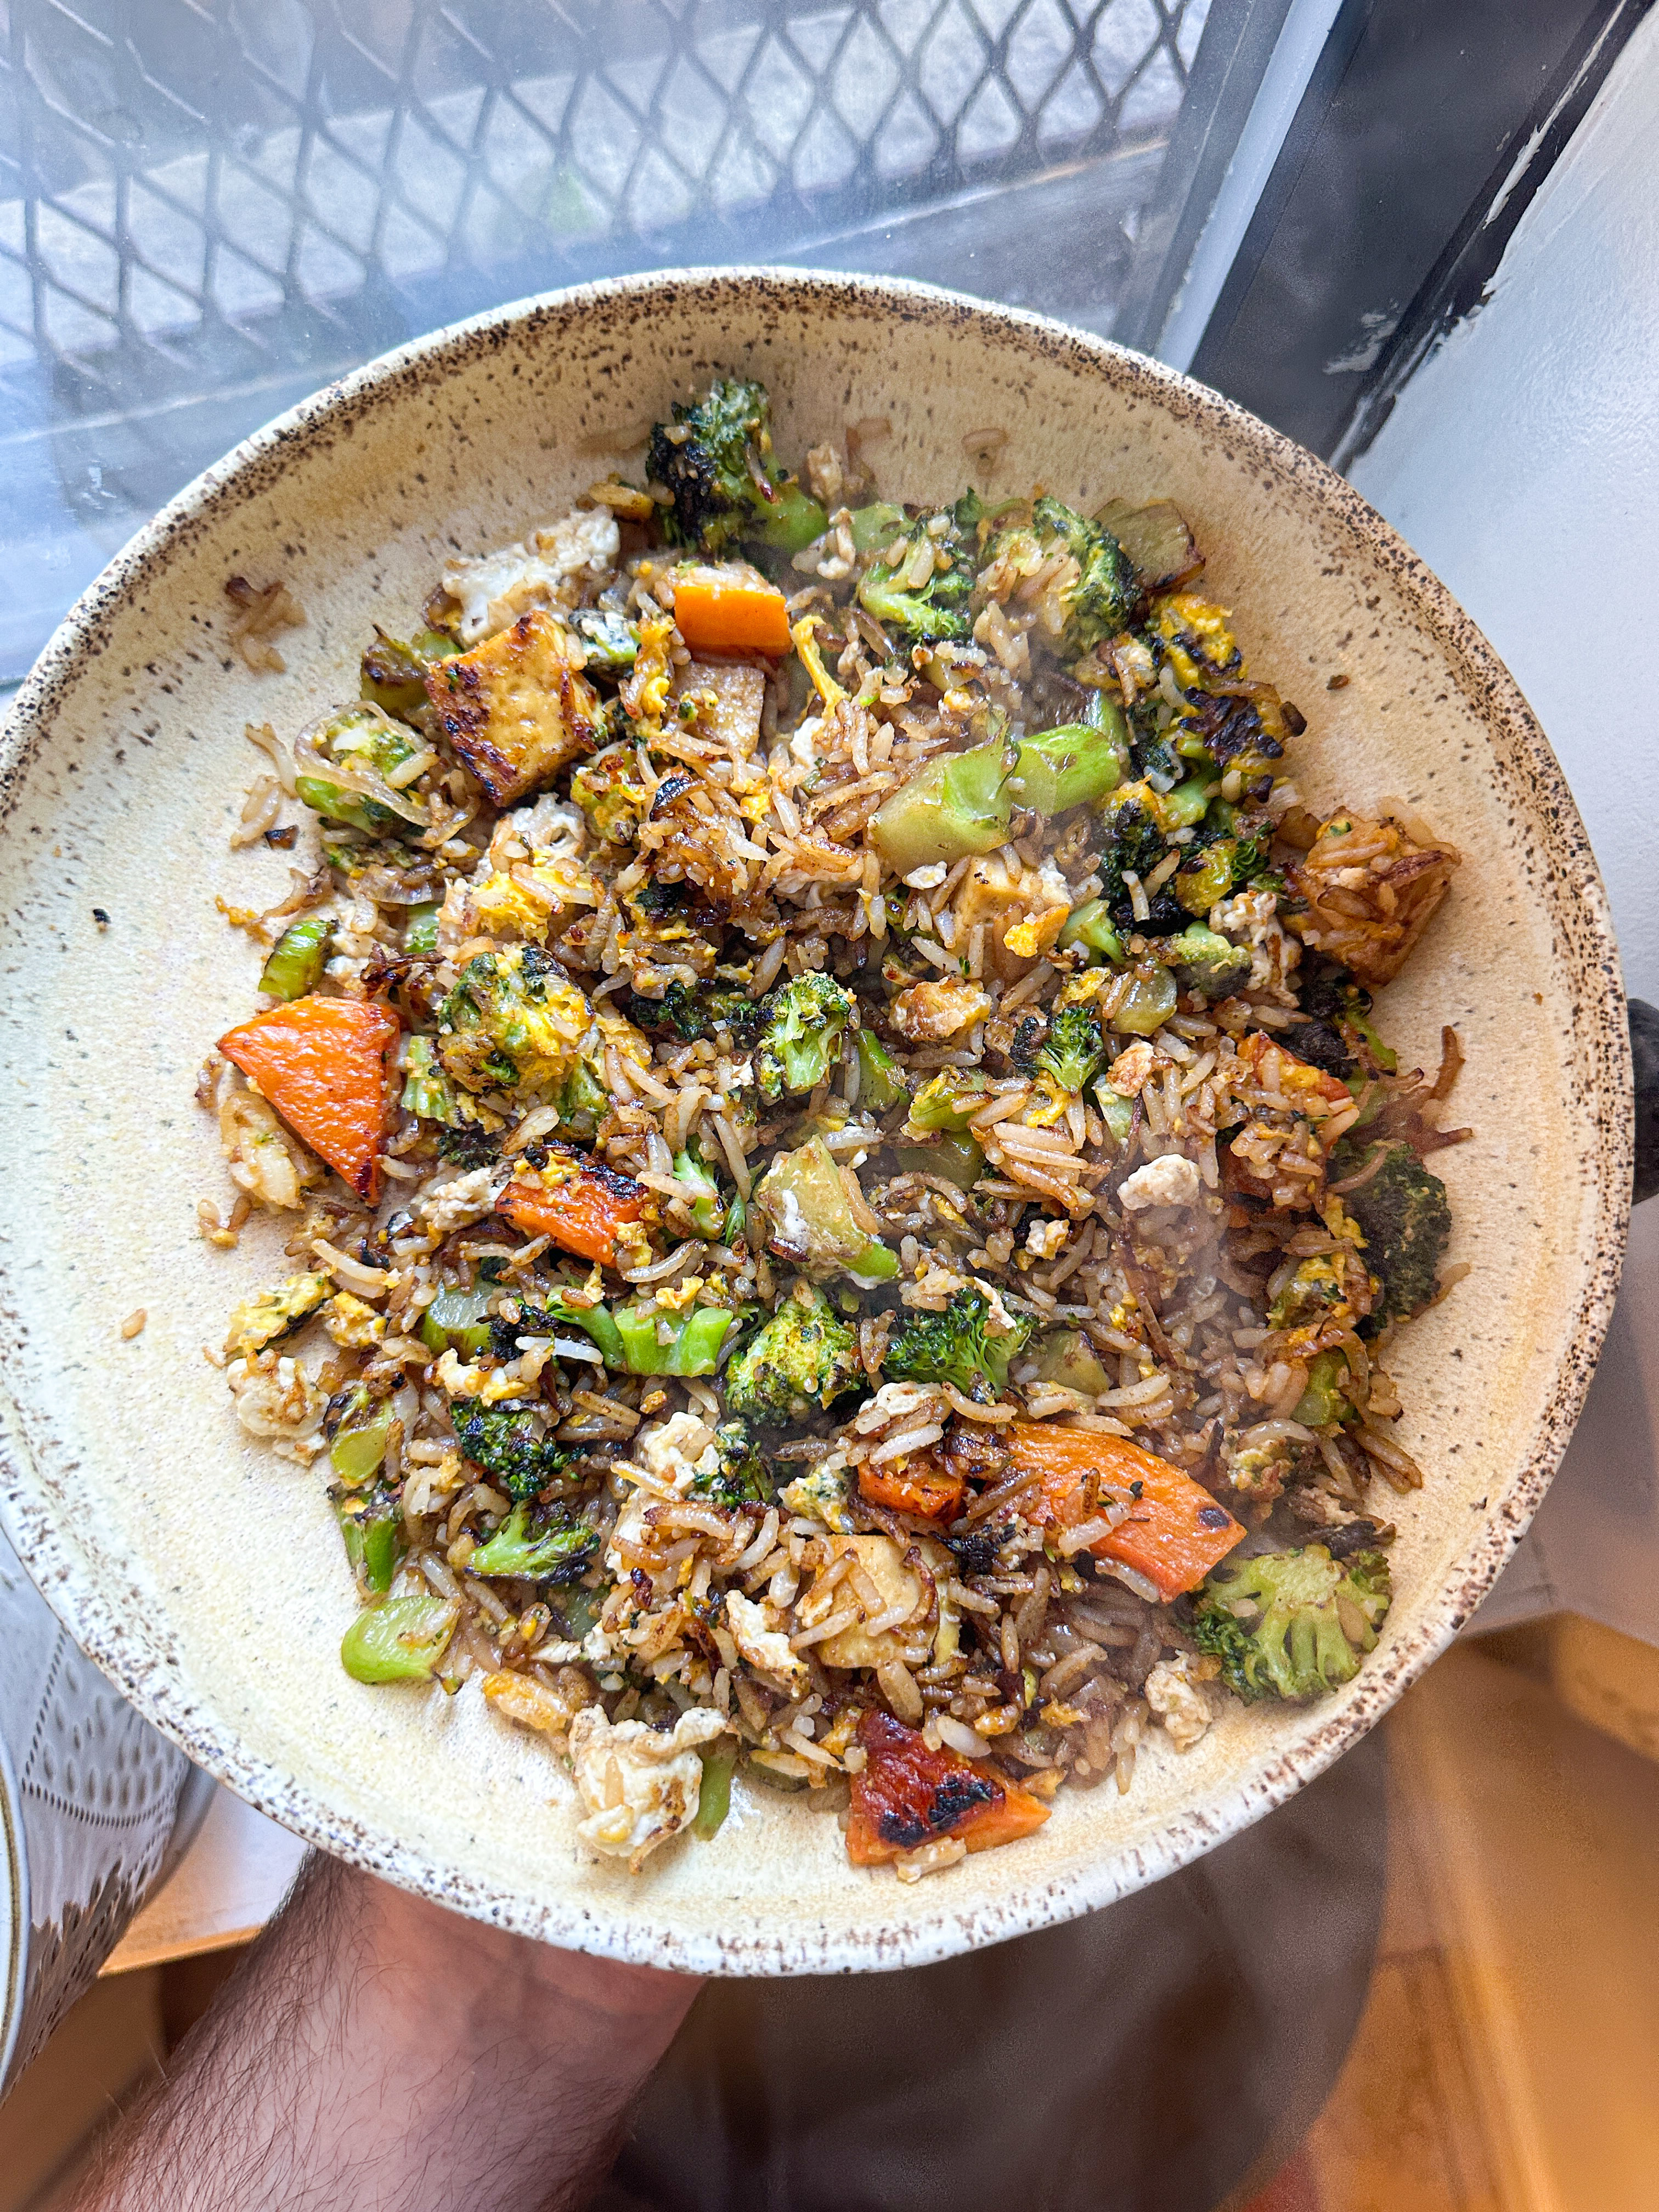 Person holding a bowl of fried rice with assorted vegetables